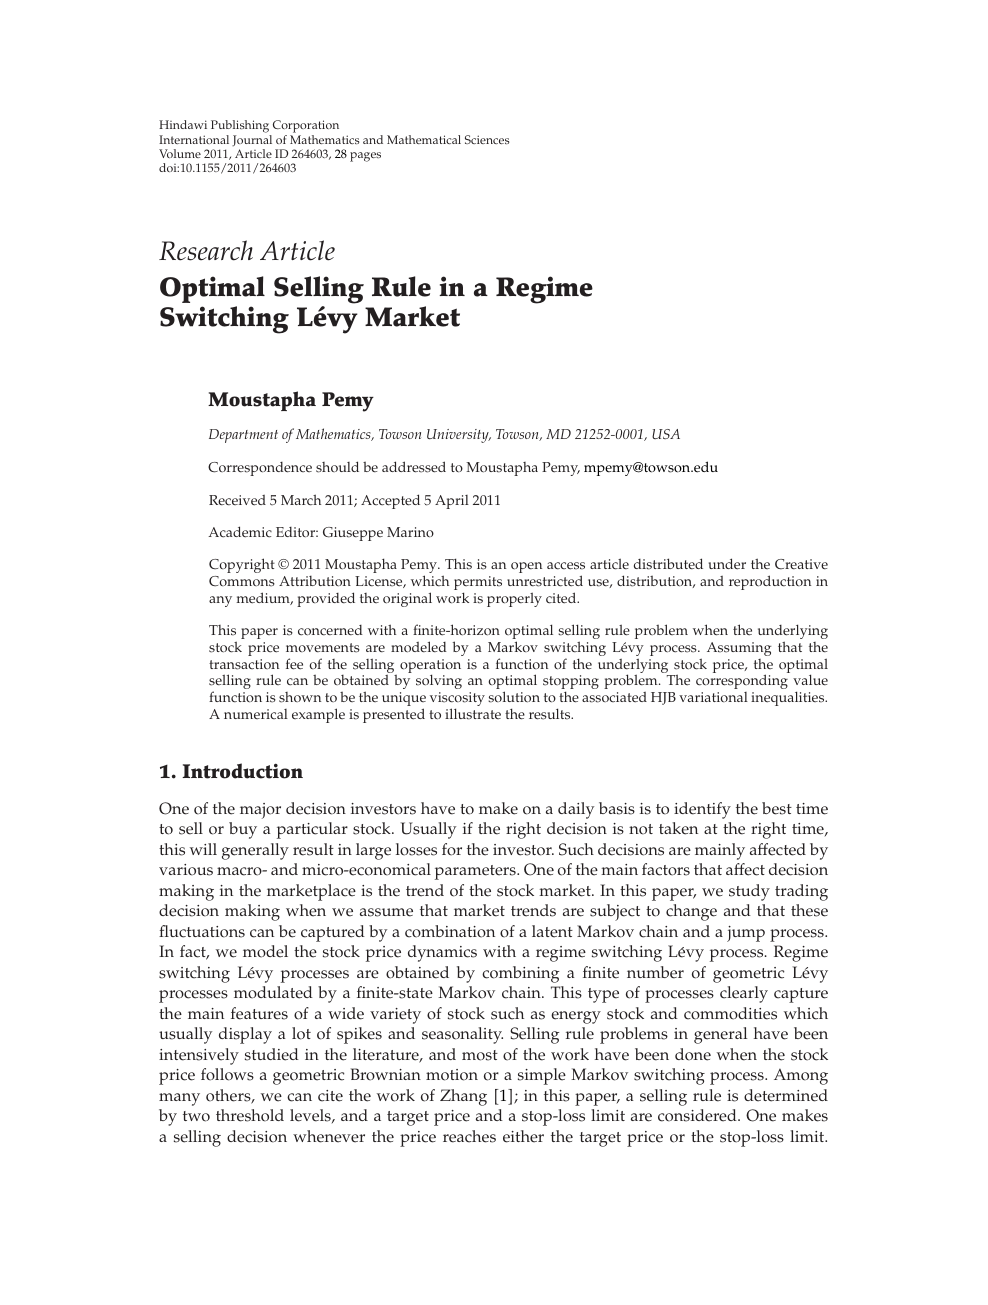 Optimal Selling Rule in a Regime Switching Lévy Market – topic of